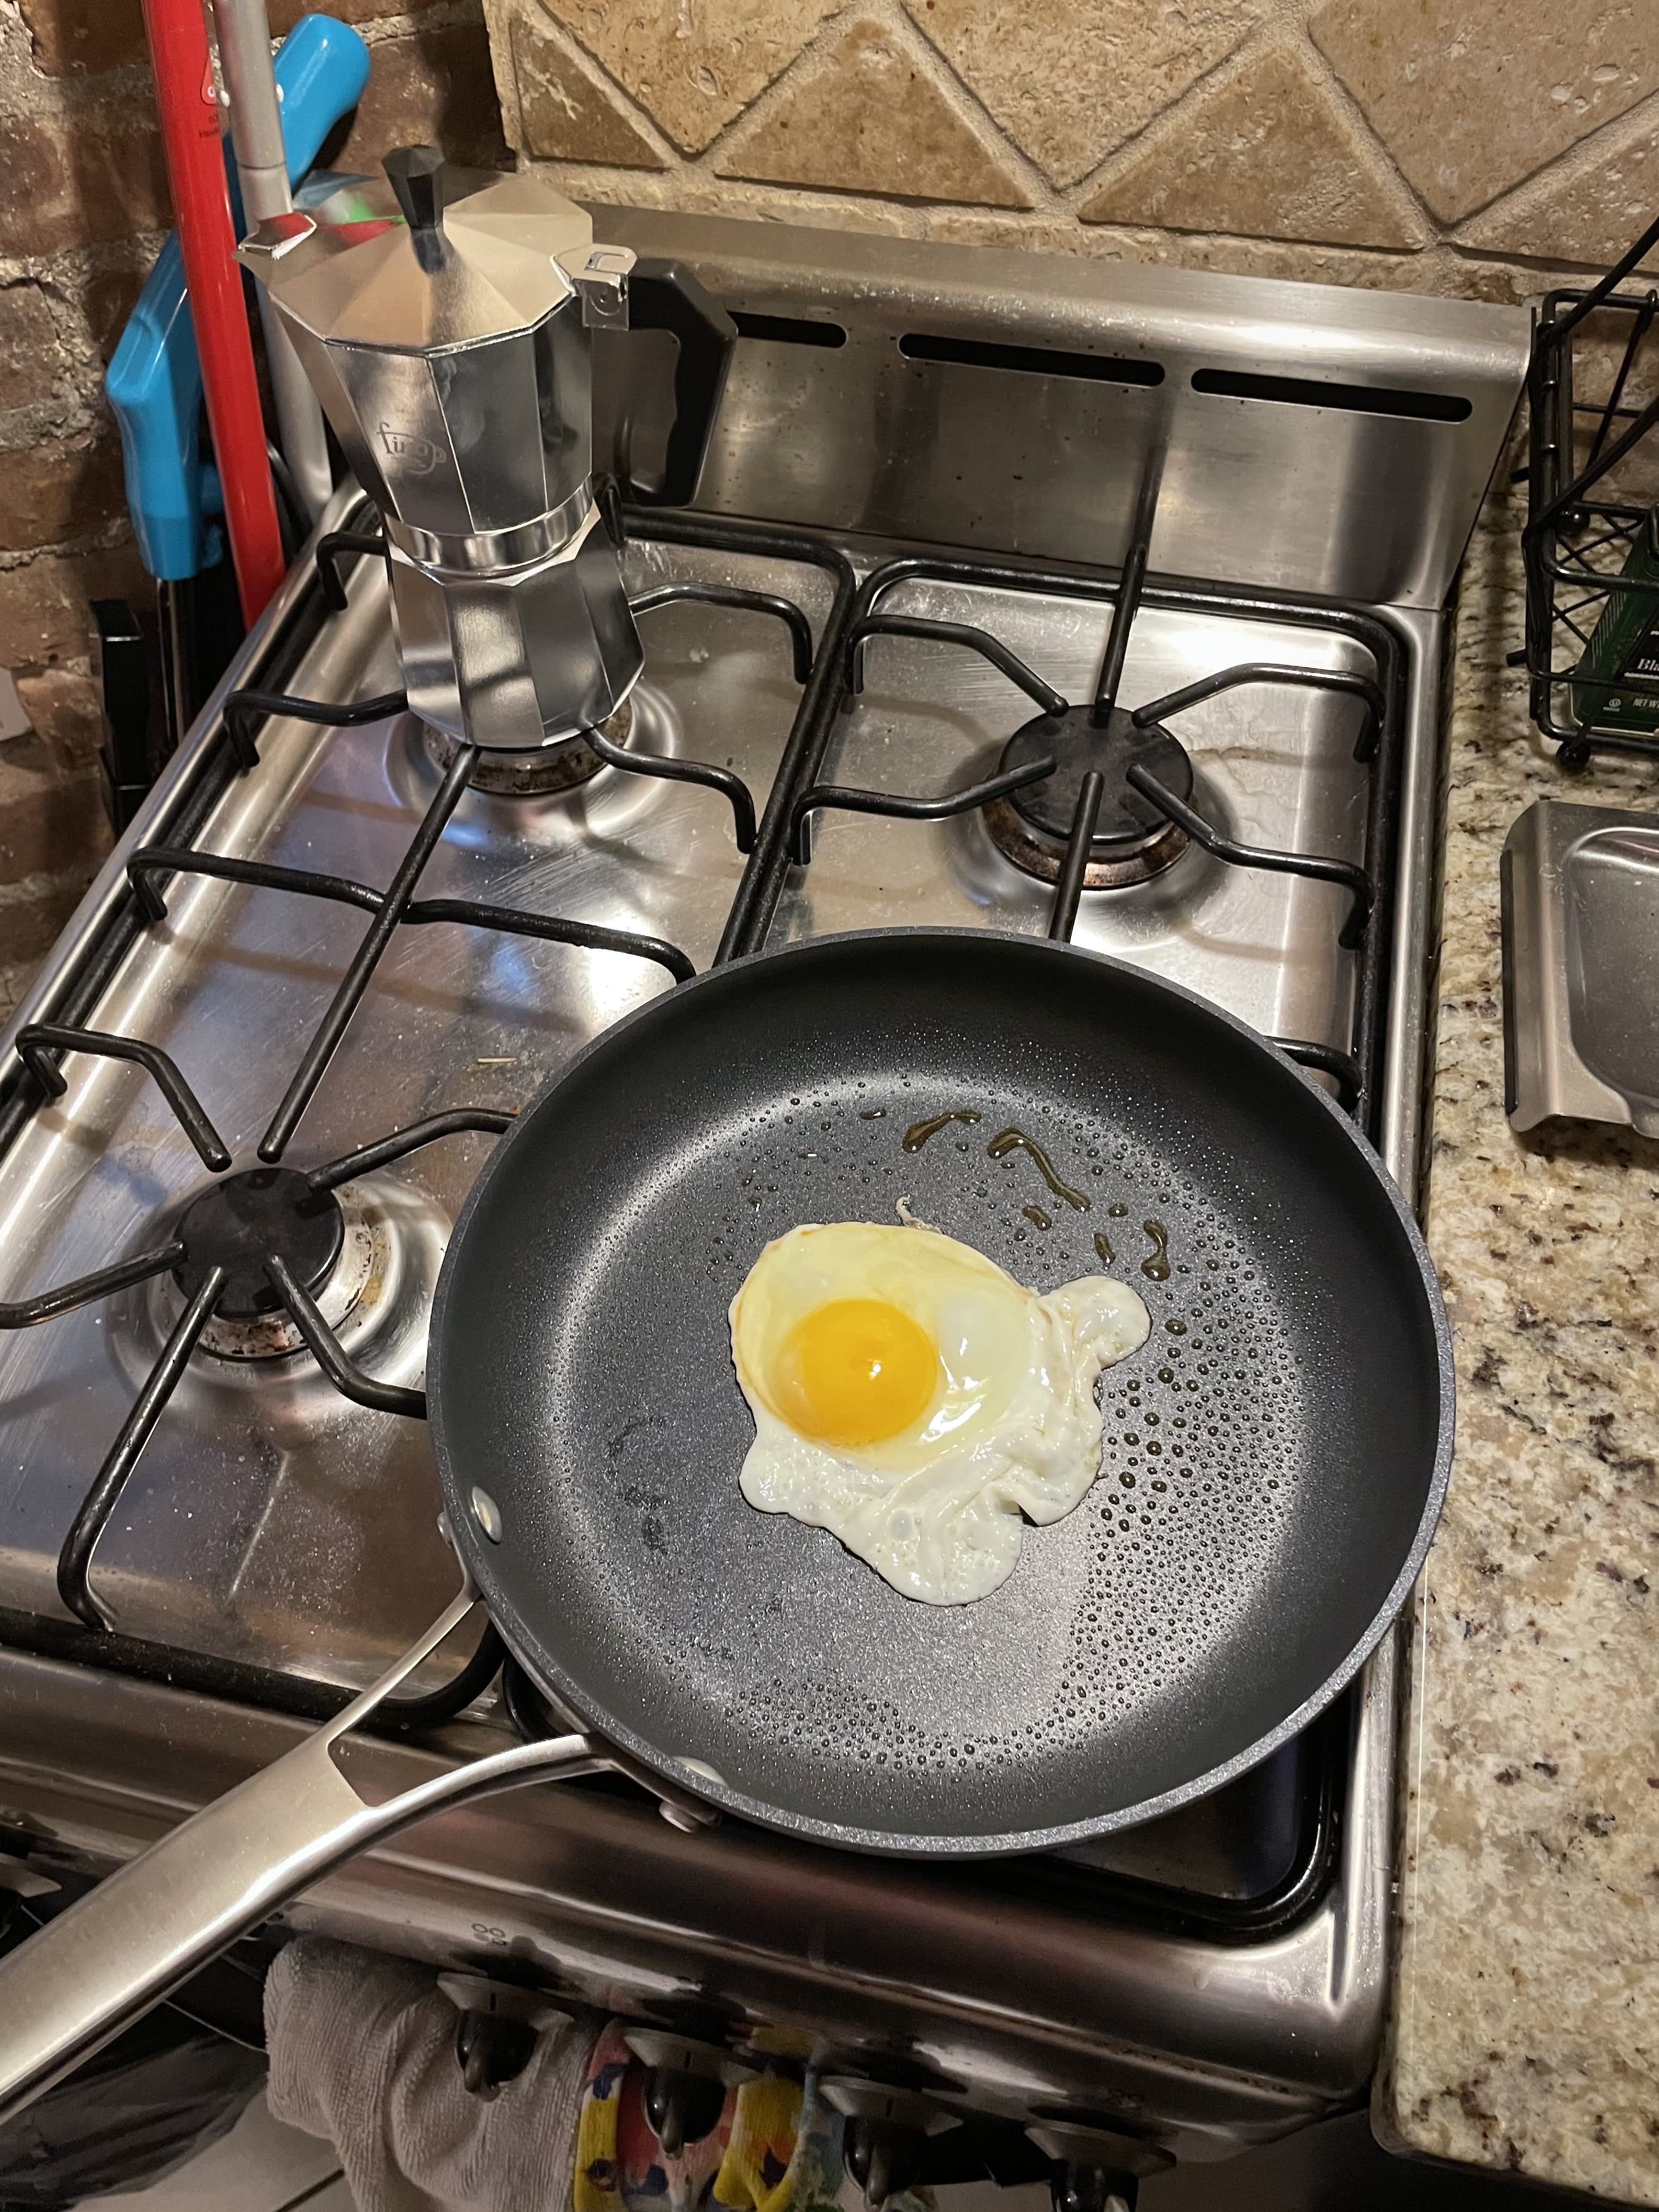 Calphalon Signature Nonstick Omelette Pan Review - Forbes Vetted